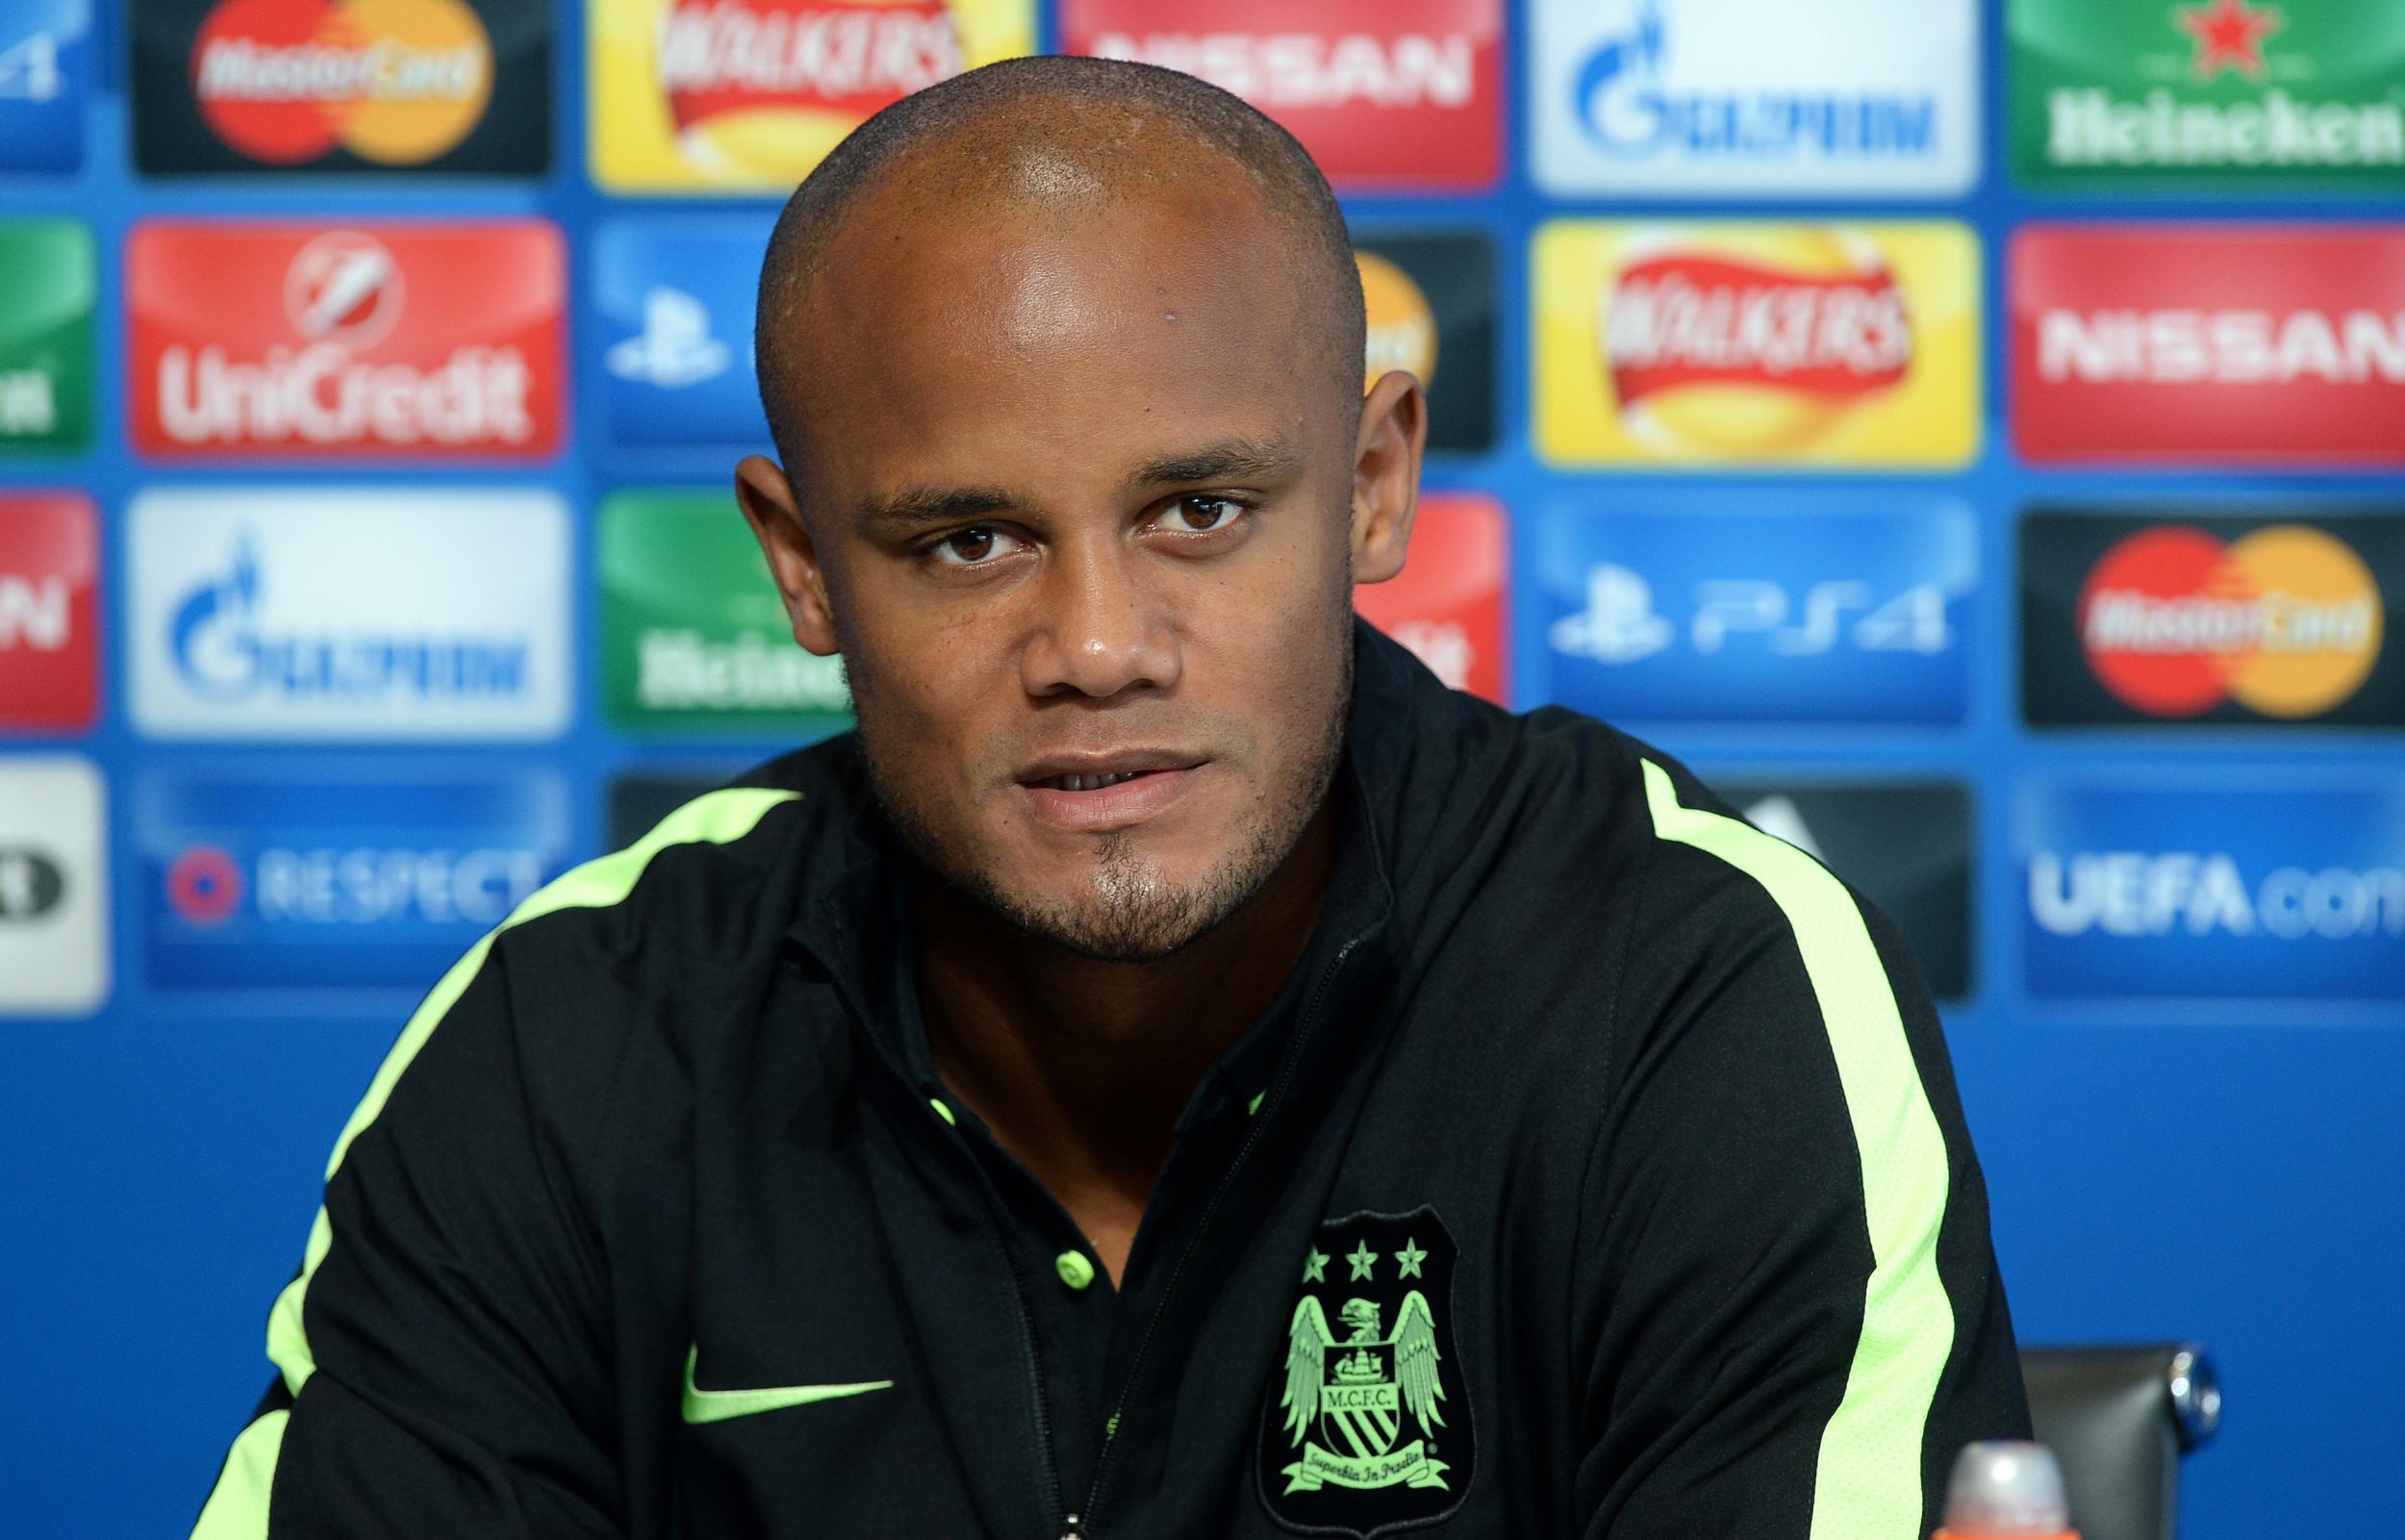 Vincent Kompany grew up near to the Molenbeek district of Brussels